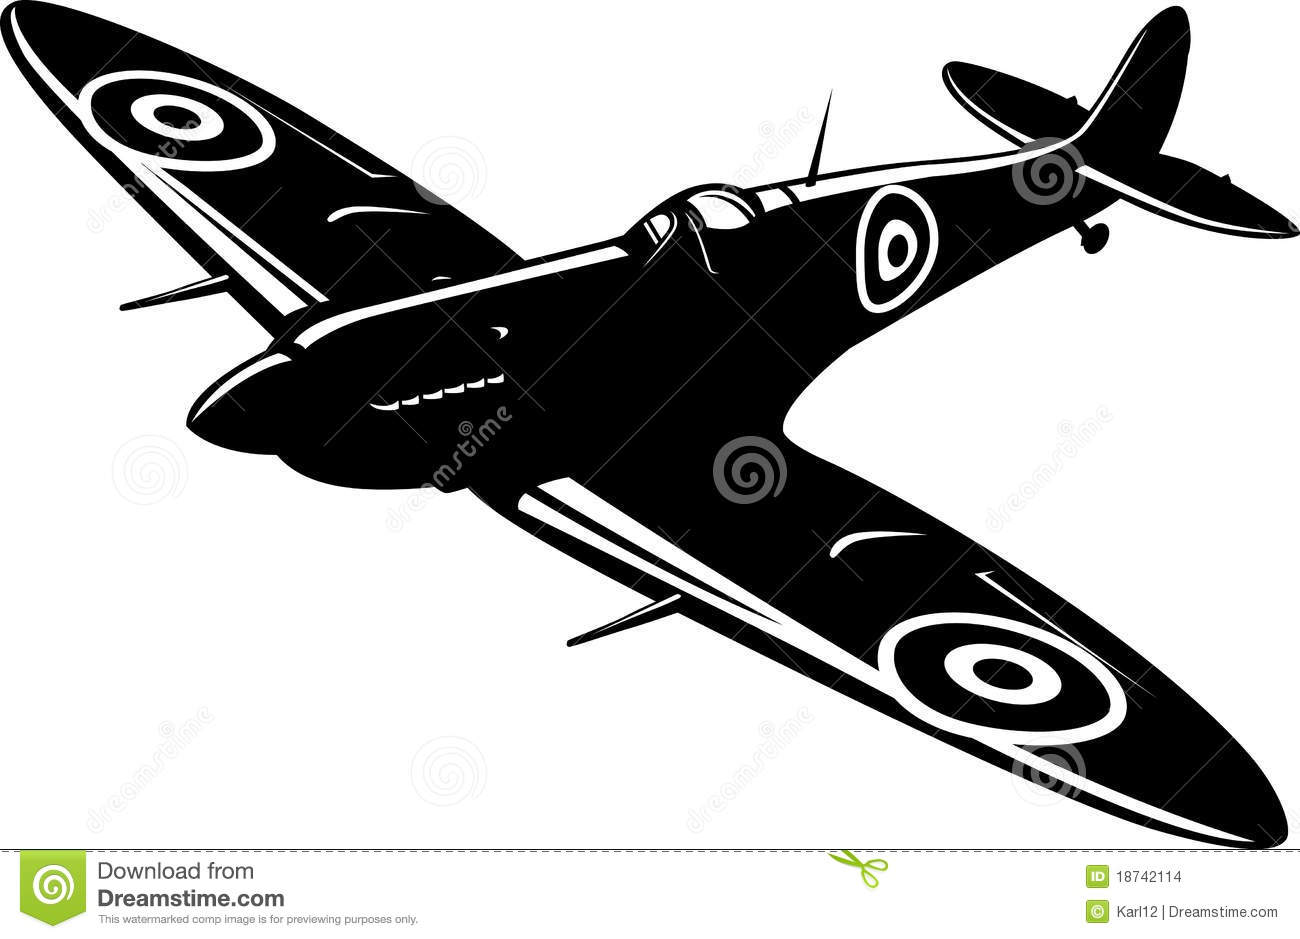 Vector Illustration Of A Fighter Spitfire Black And White